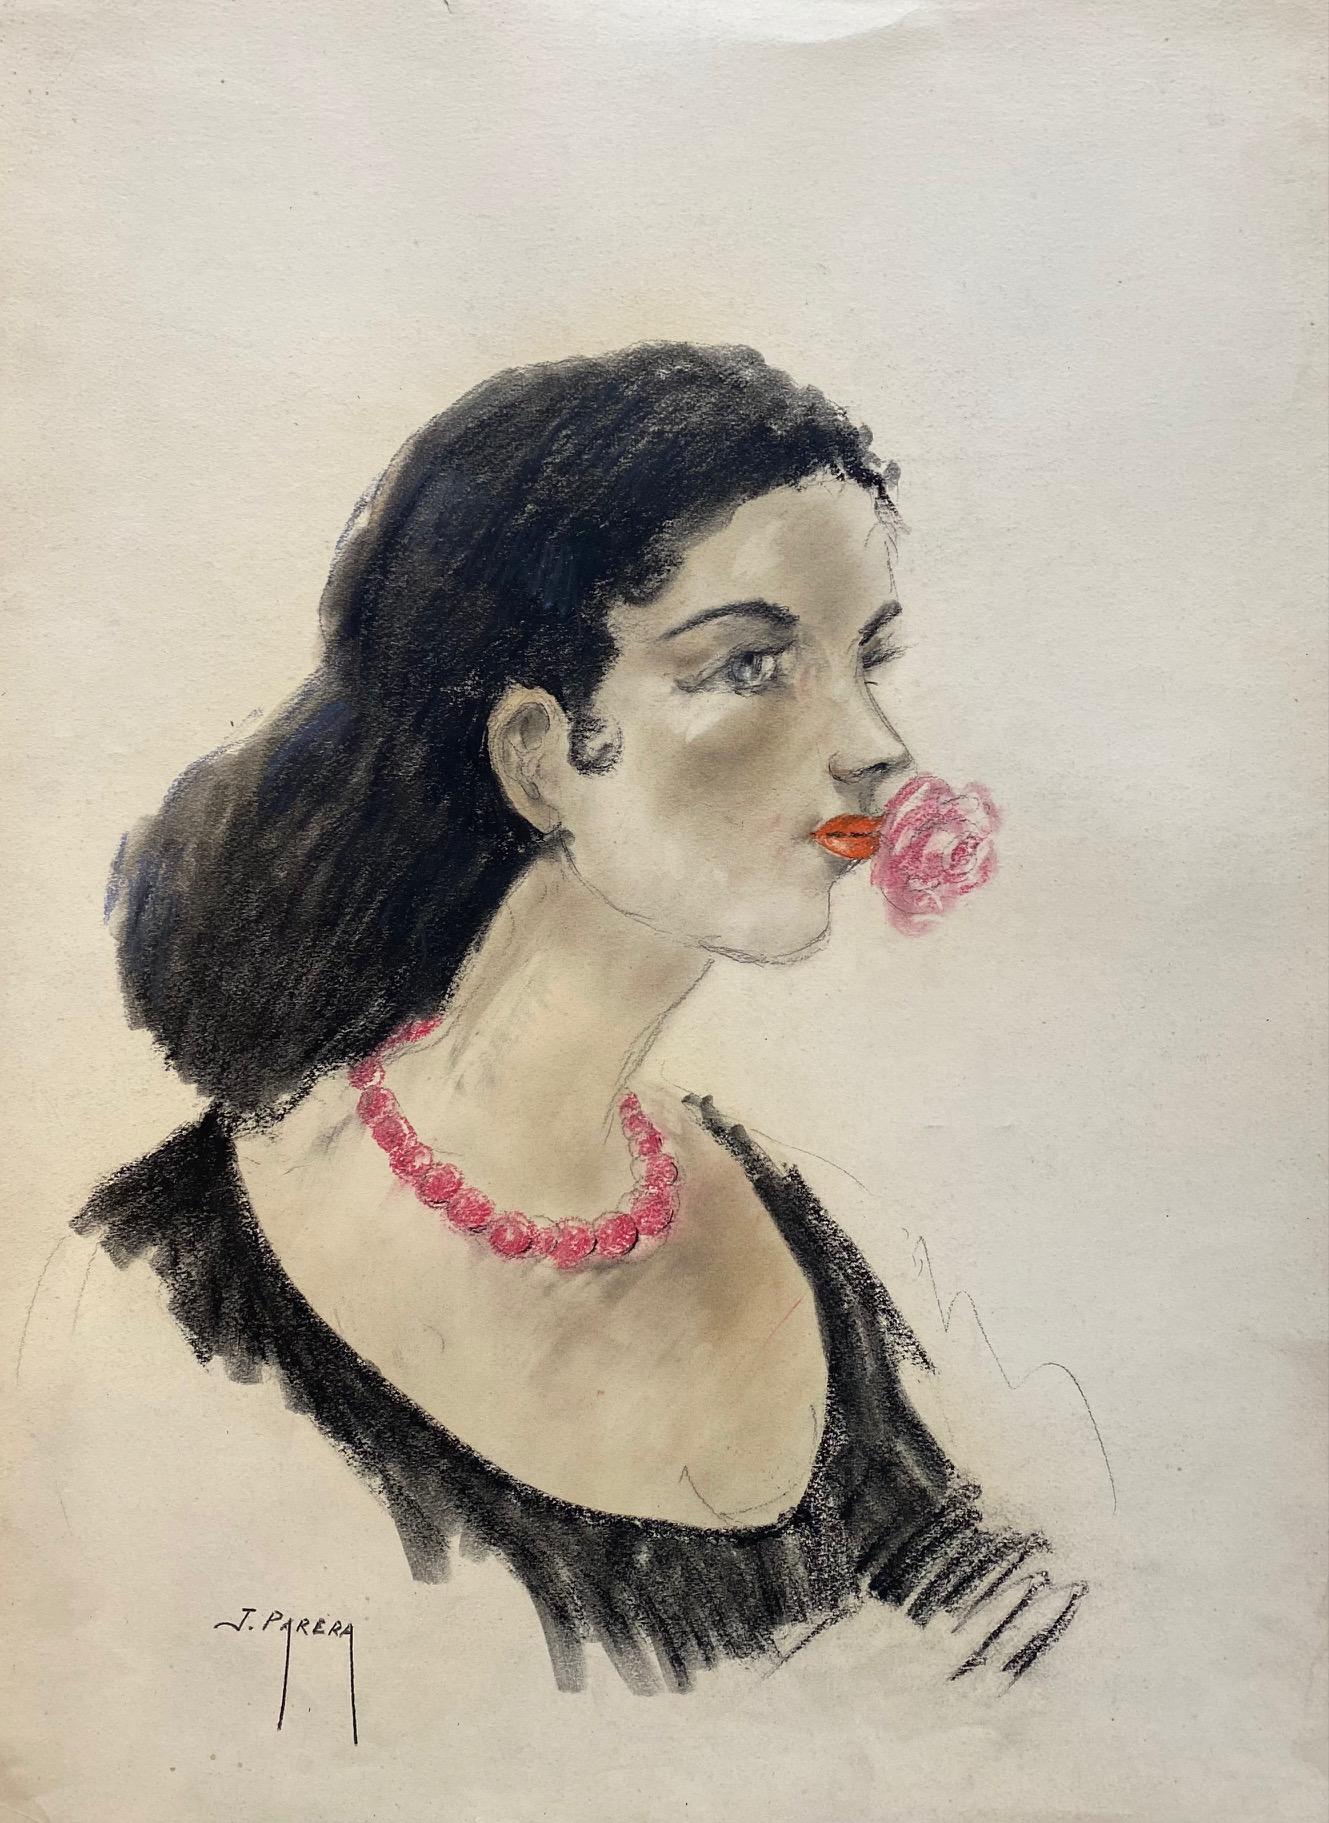 The Rose by Jose Parera - Oil pastel on paper 50x70 cm 